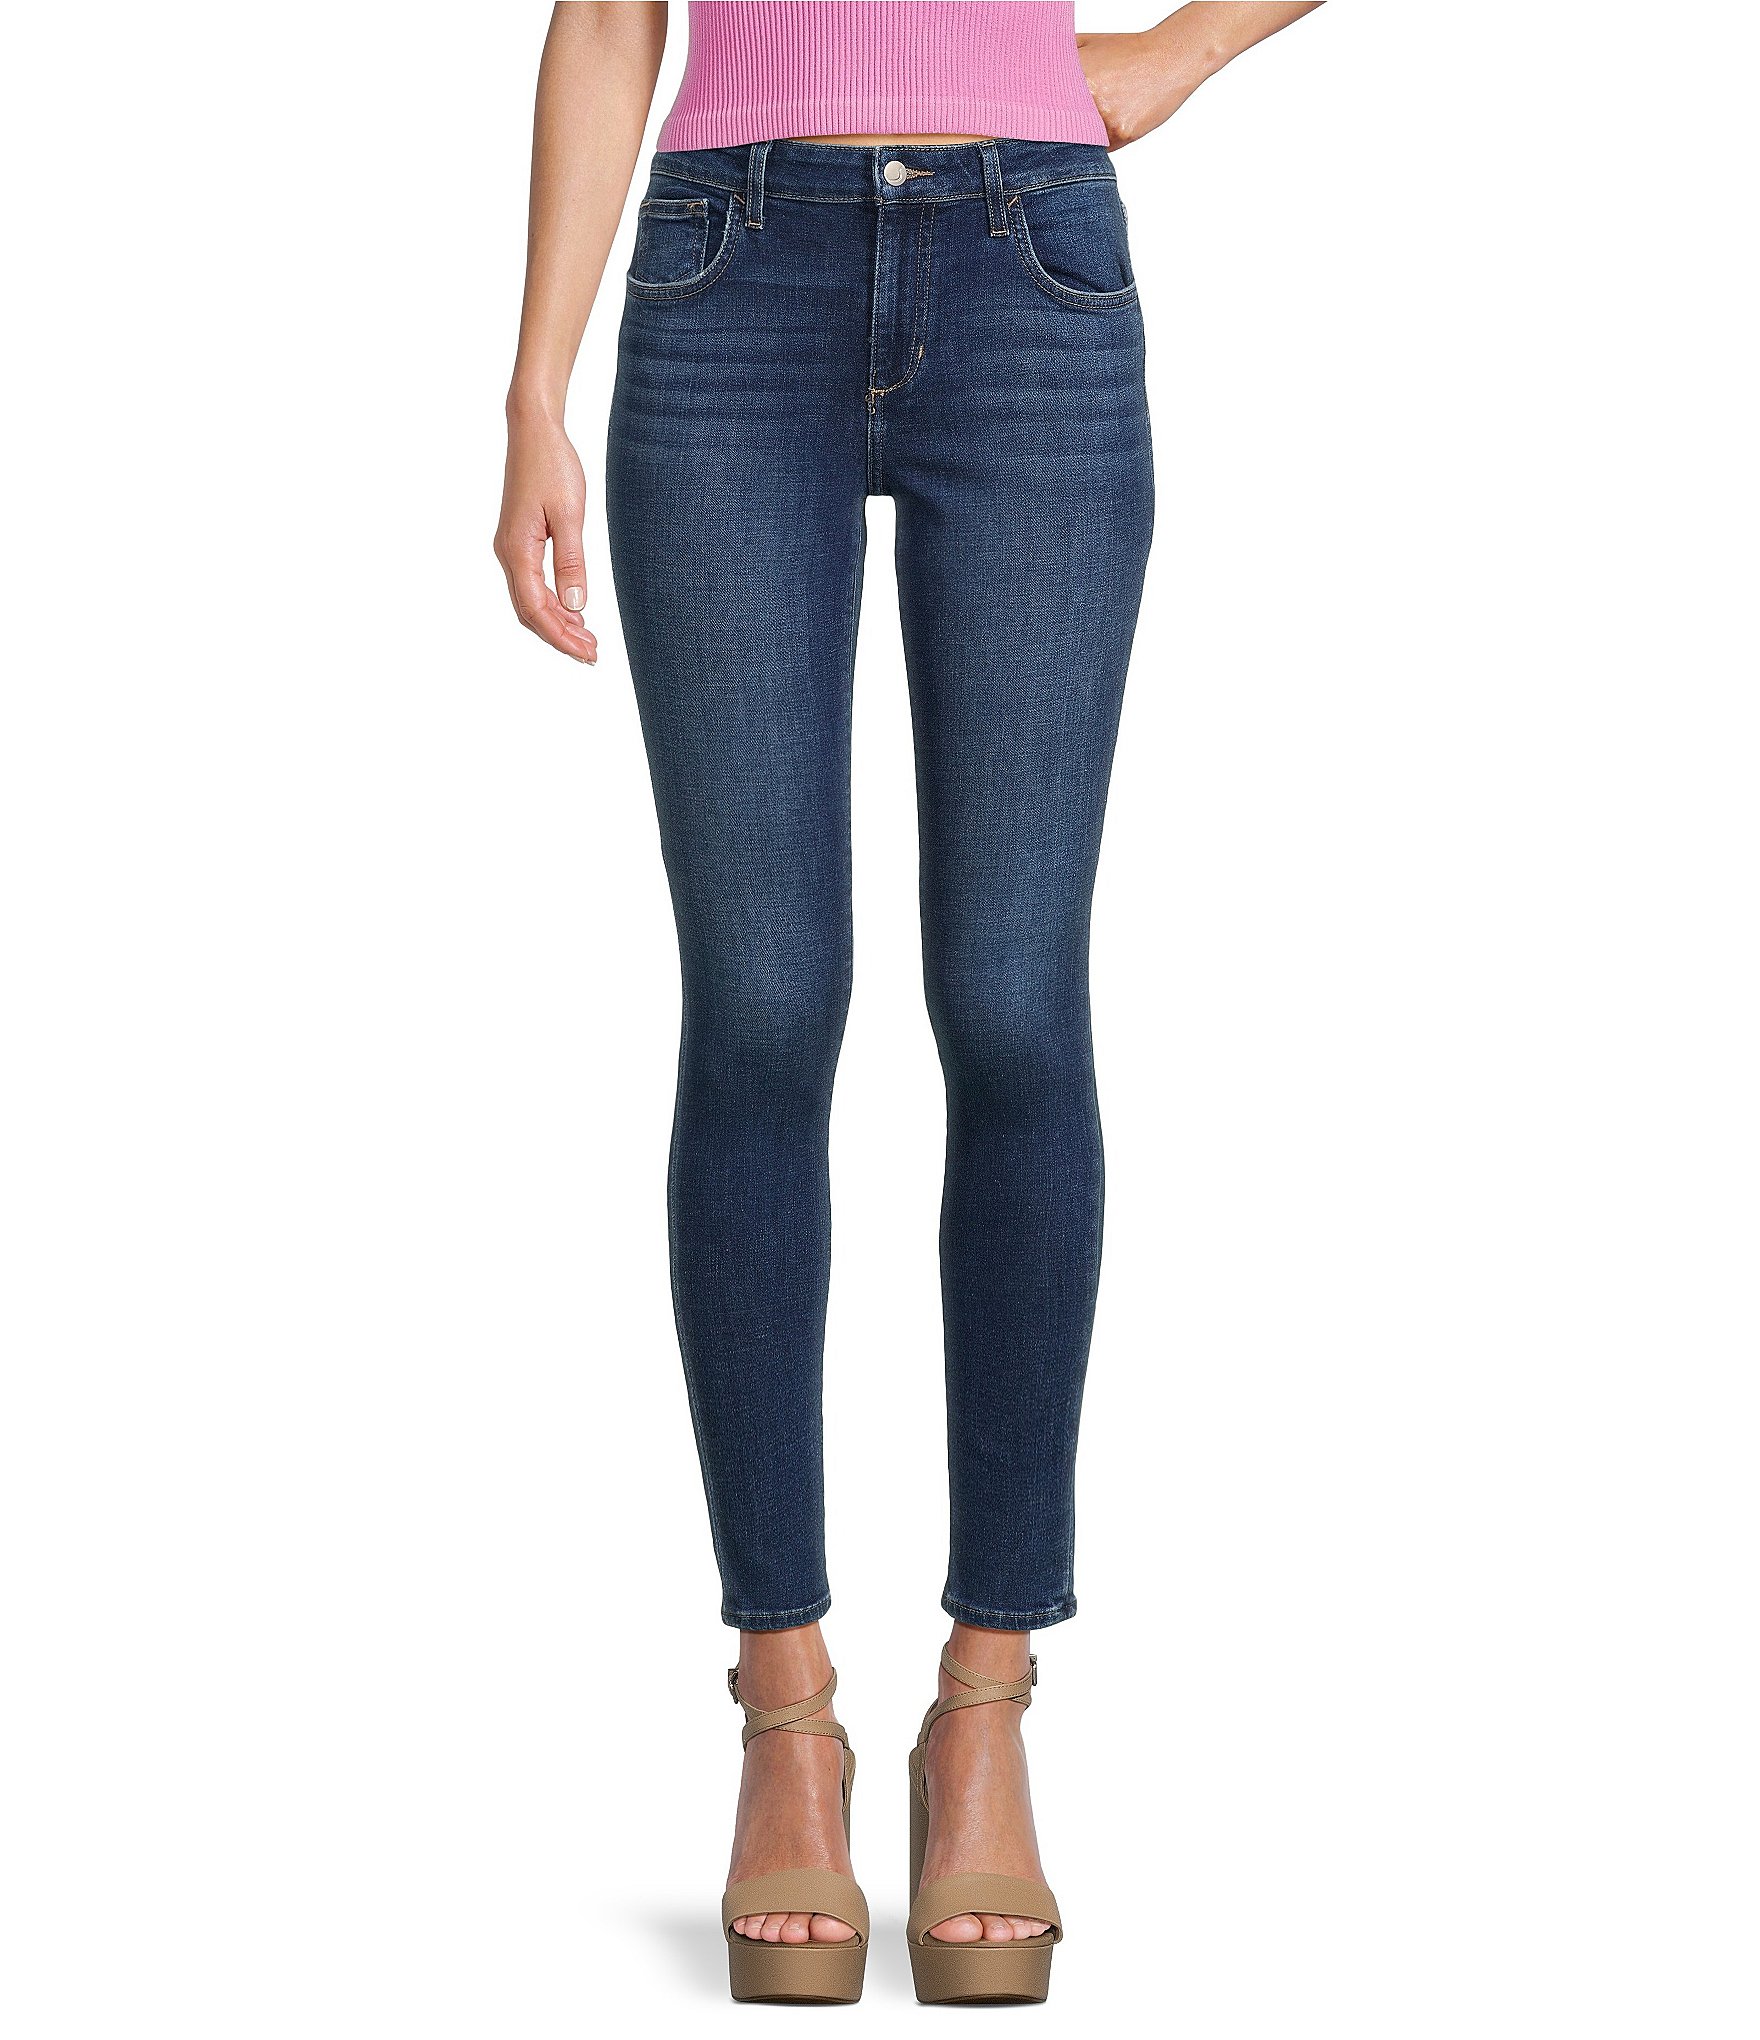 https://dimg.dillards.com/is/image/DillardsZoom/zoom/joes-jeans-the-icon-ankle-skinny-fit-jeans/00000001_zi_stephaney05843255.jpg